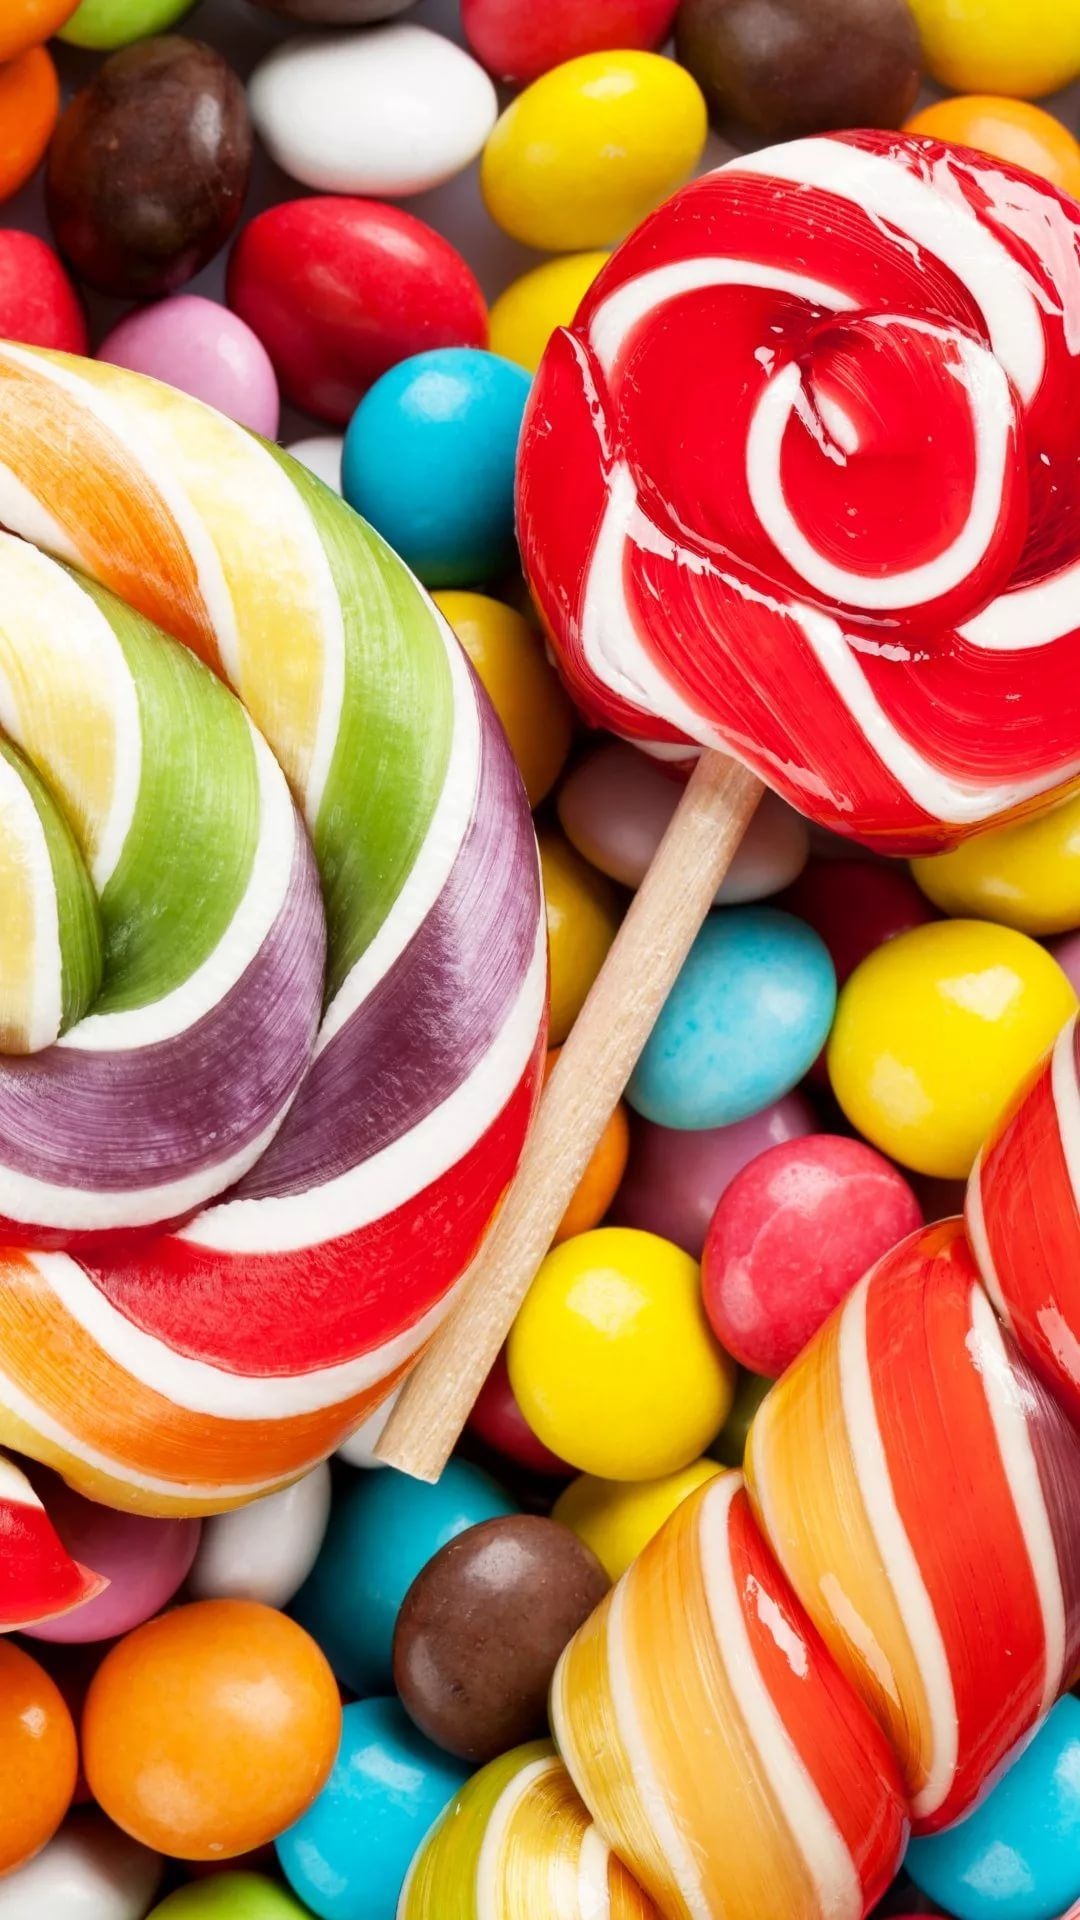 Candy-themed phone wallpapers, Colorful and vibrant, Sweet indulgence, Eye-catching design, 1080x1920 Full HD Phone